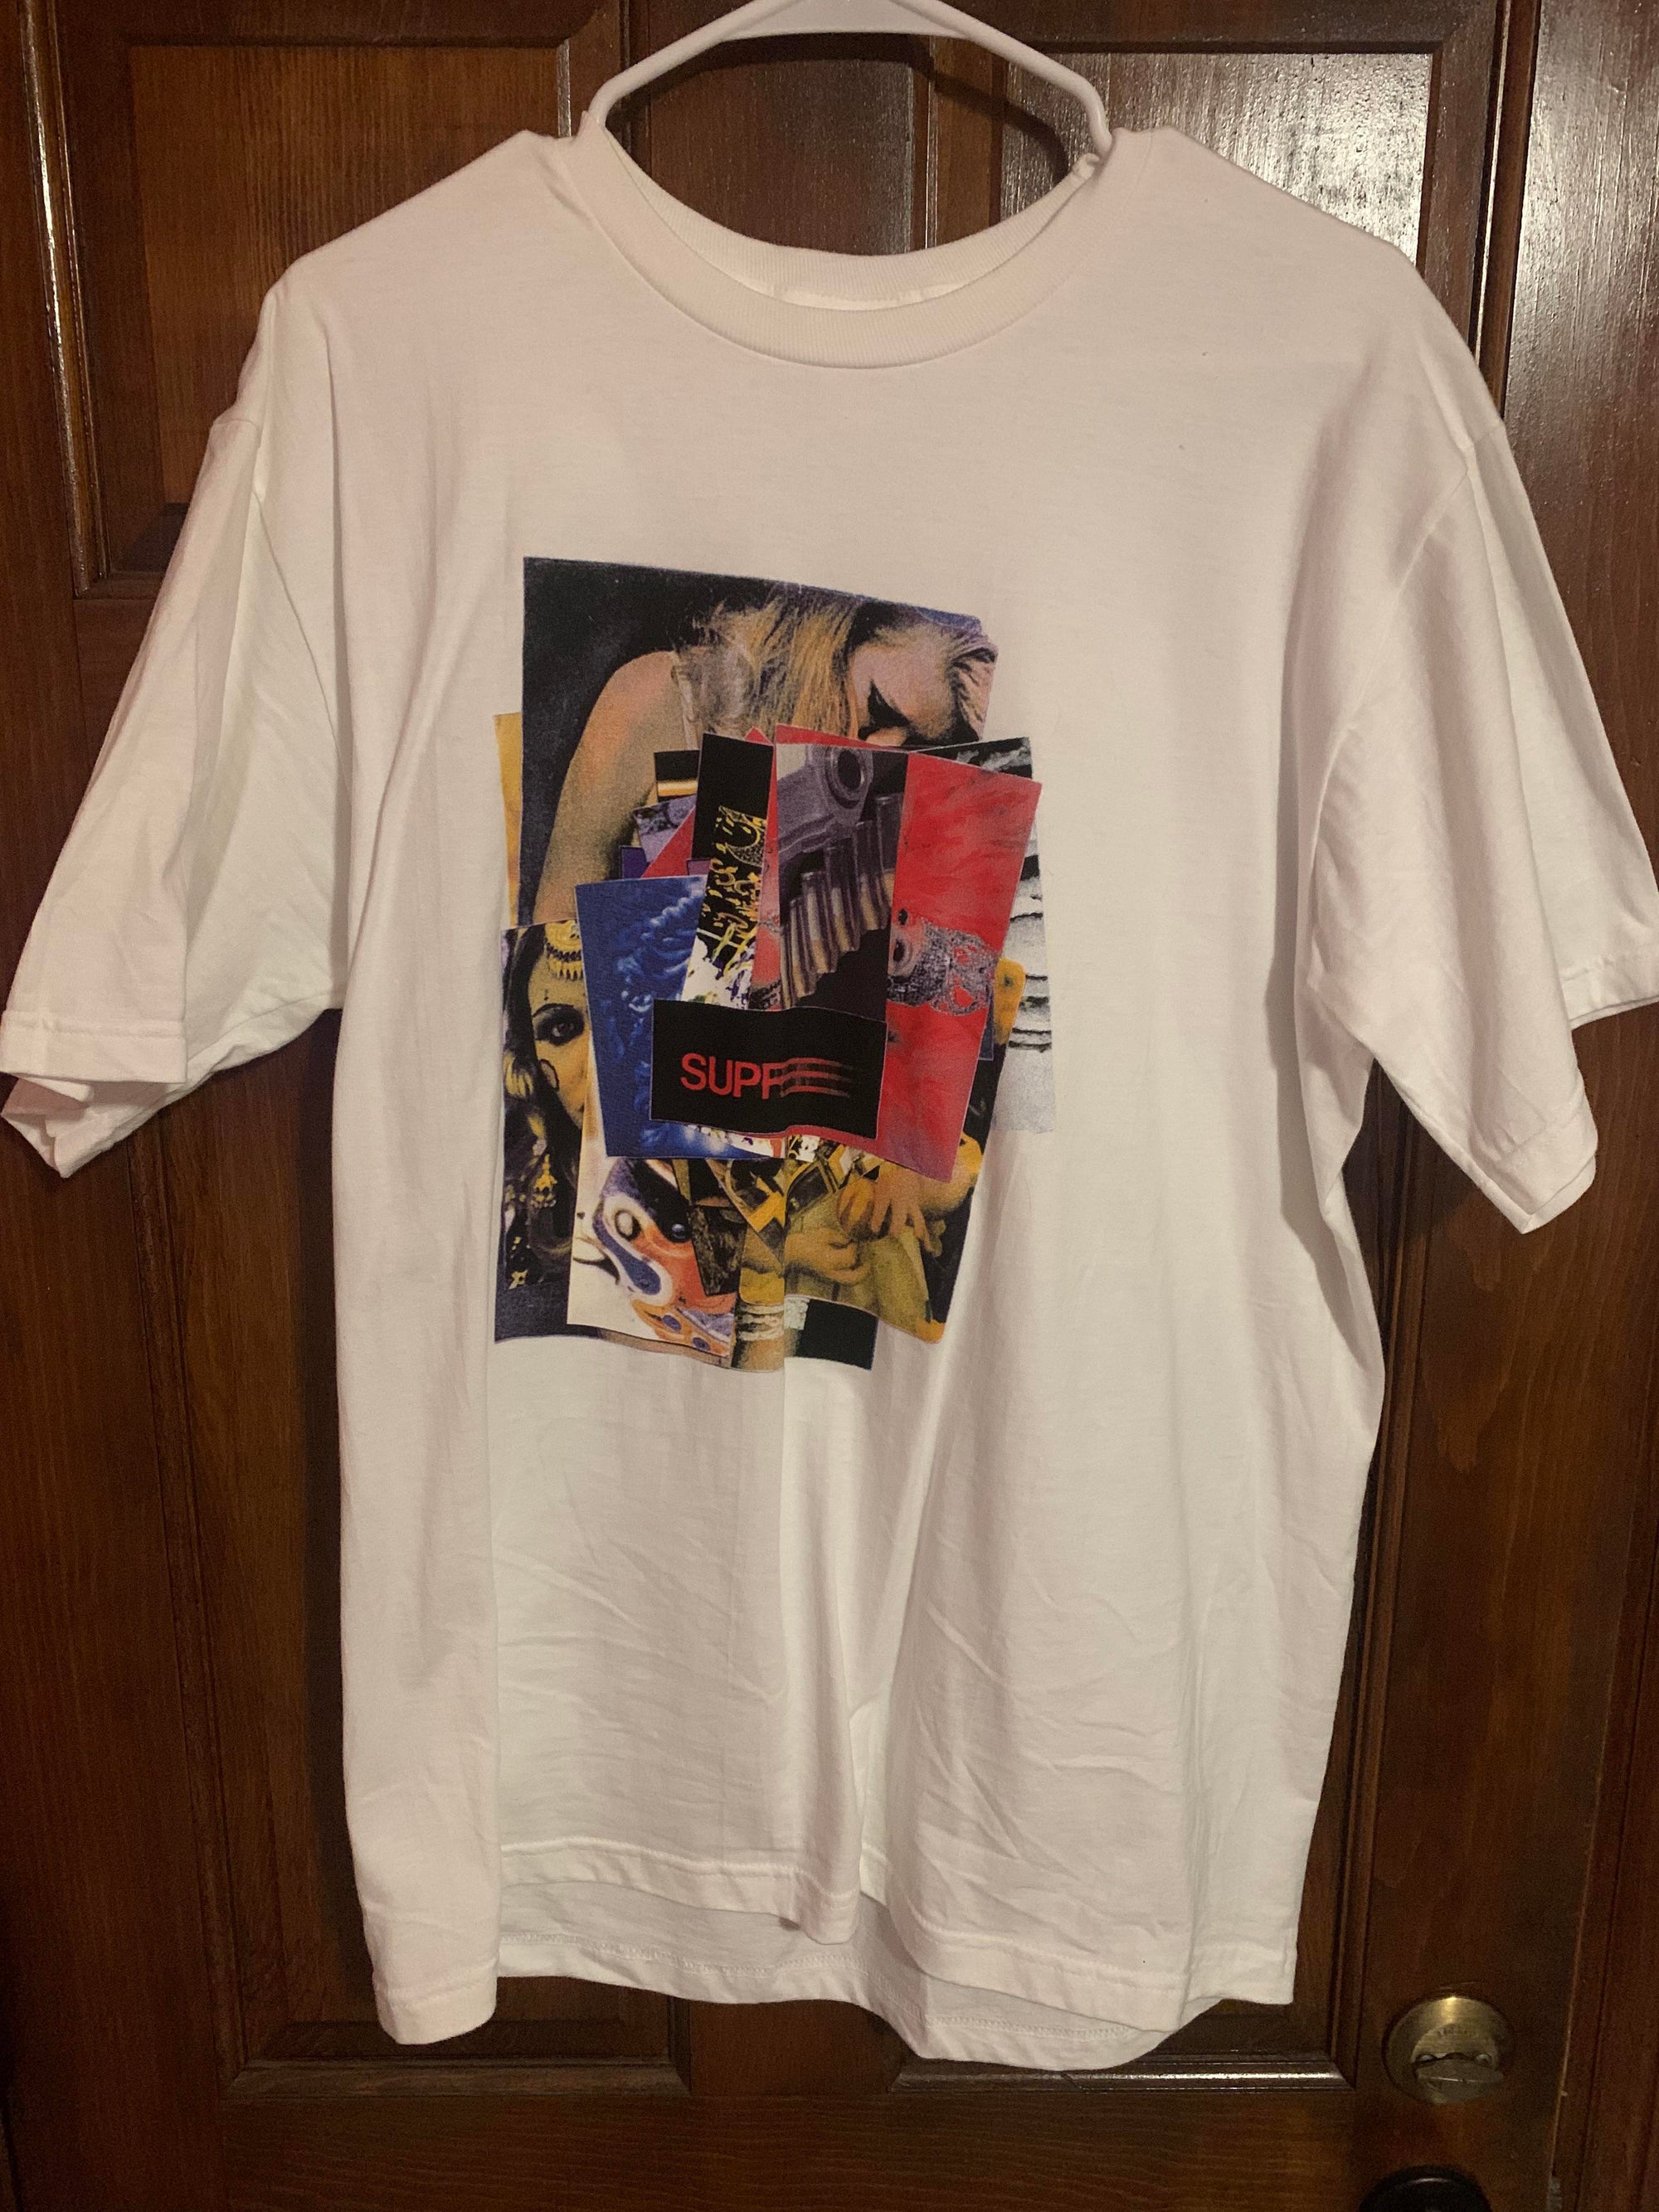 How To Wash Graphic Tees Reddit?